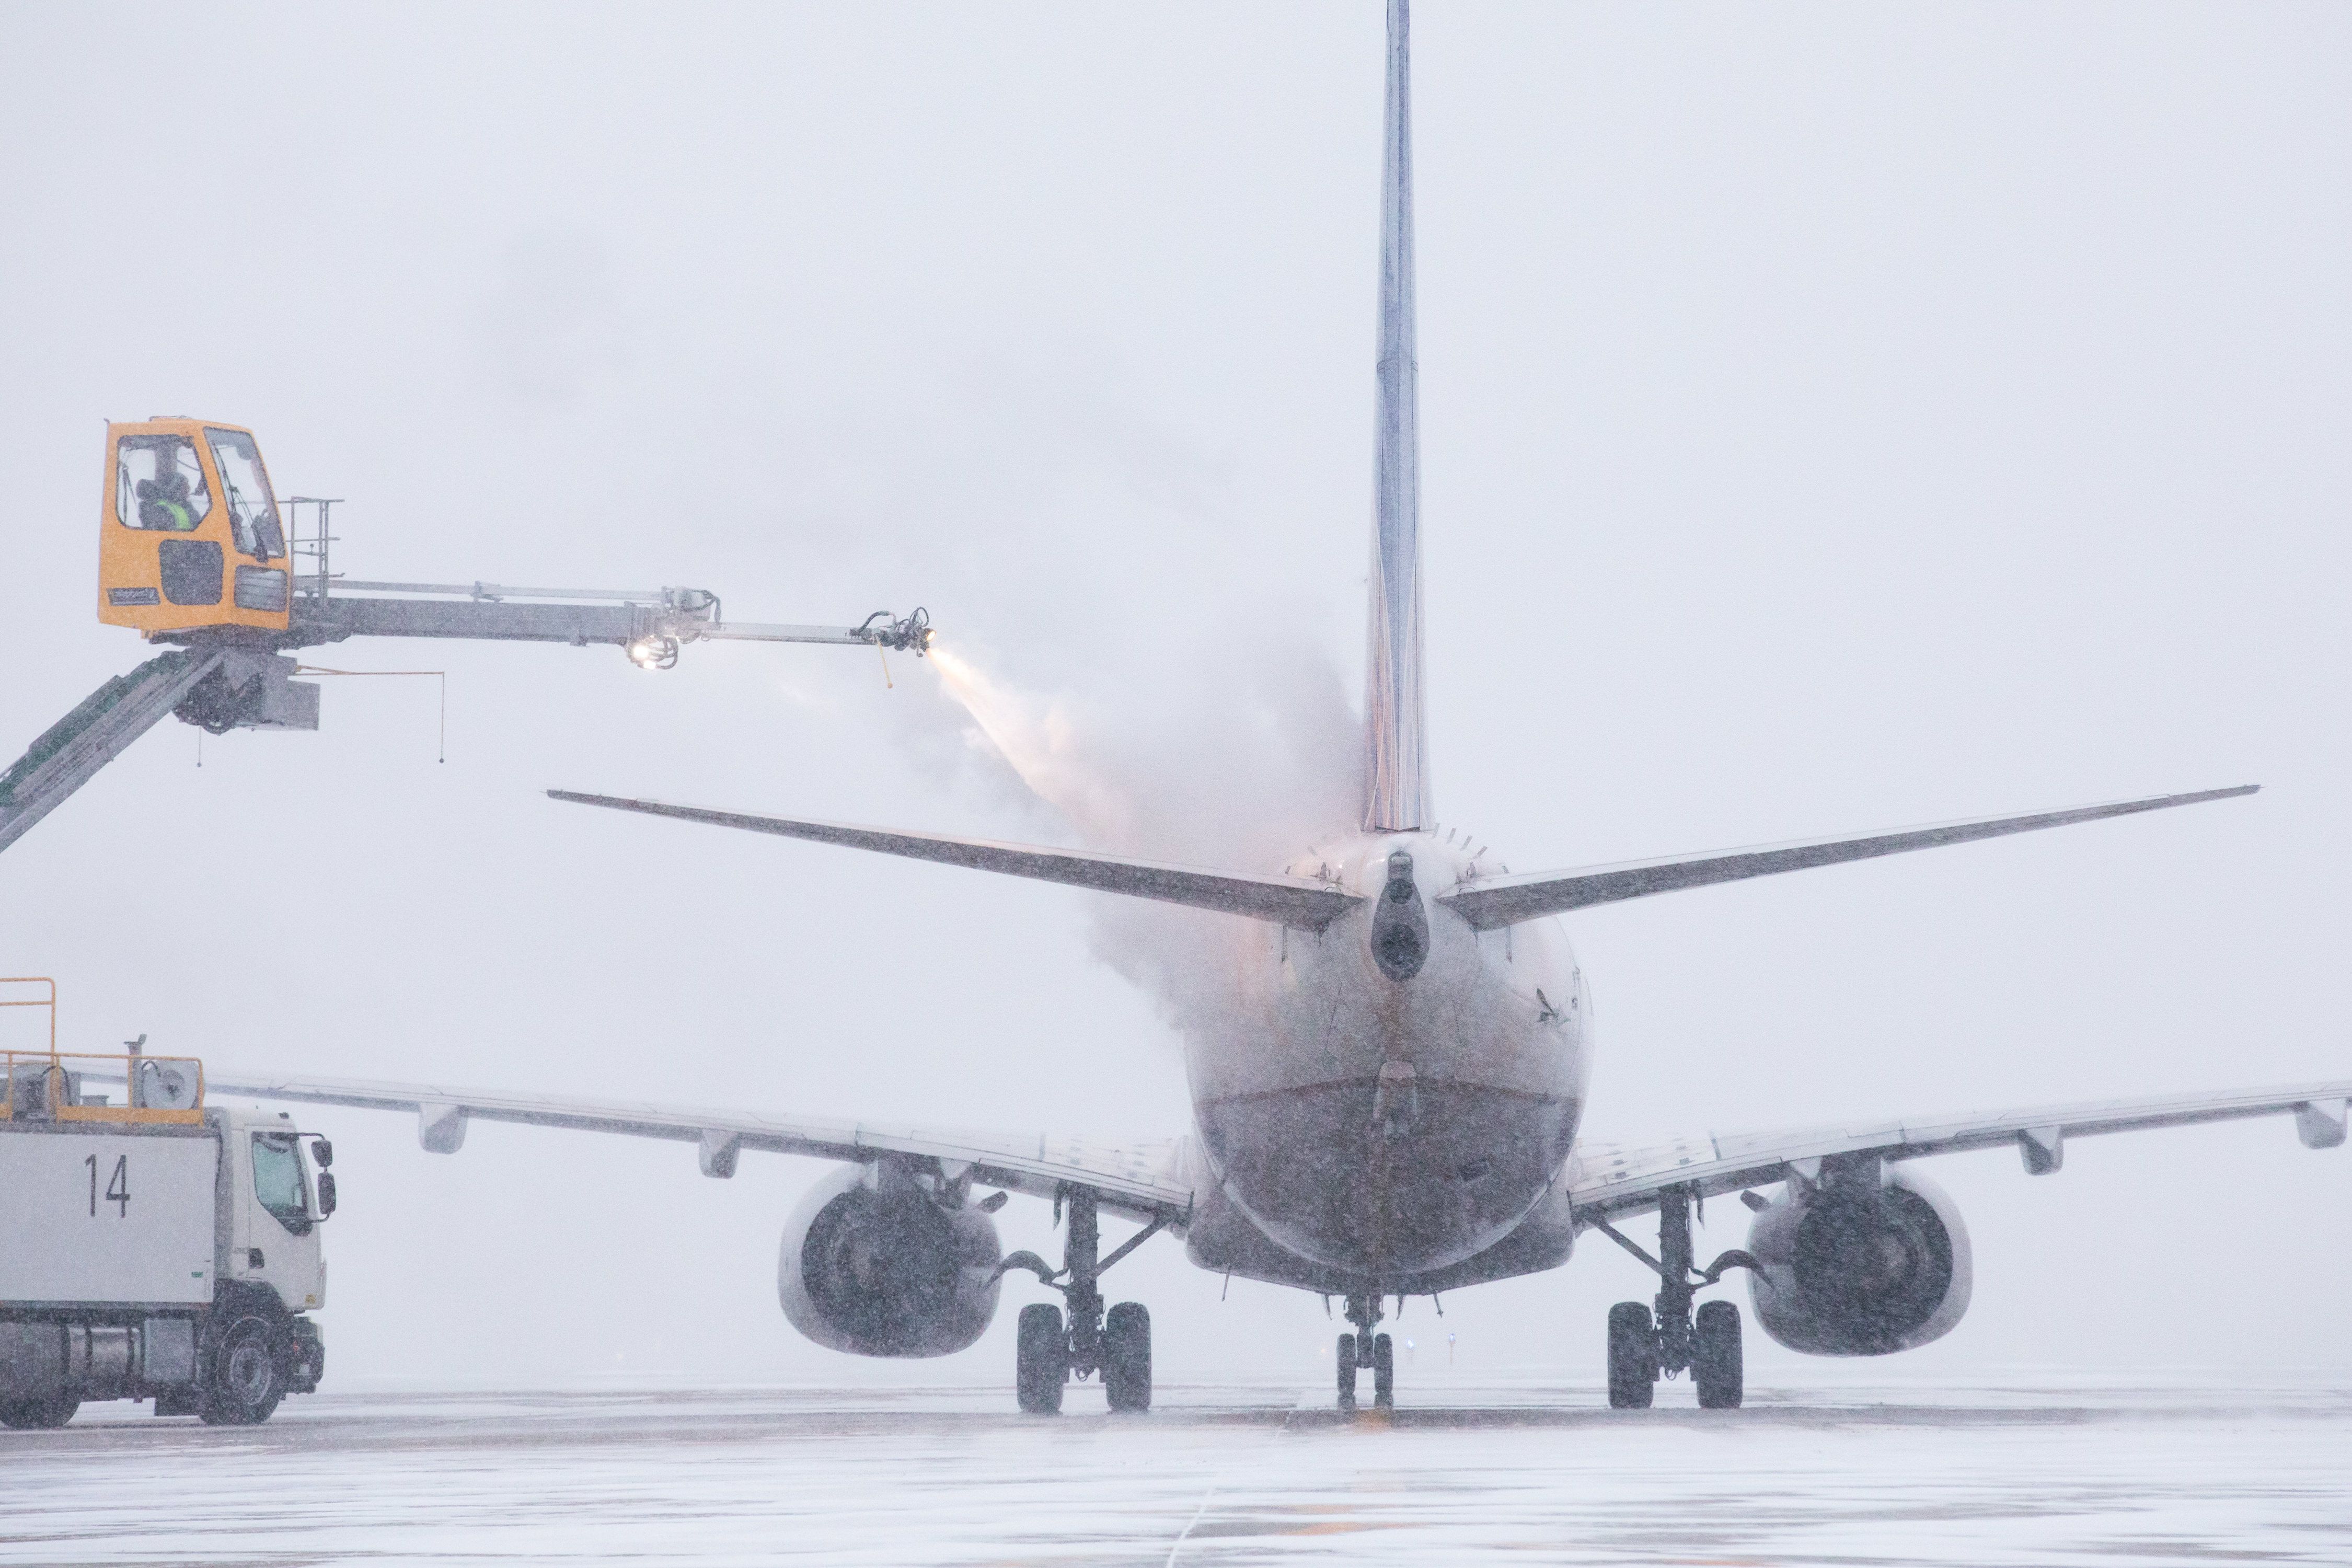 A United Airlines plane being sprayed with de-icing solution.